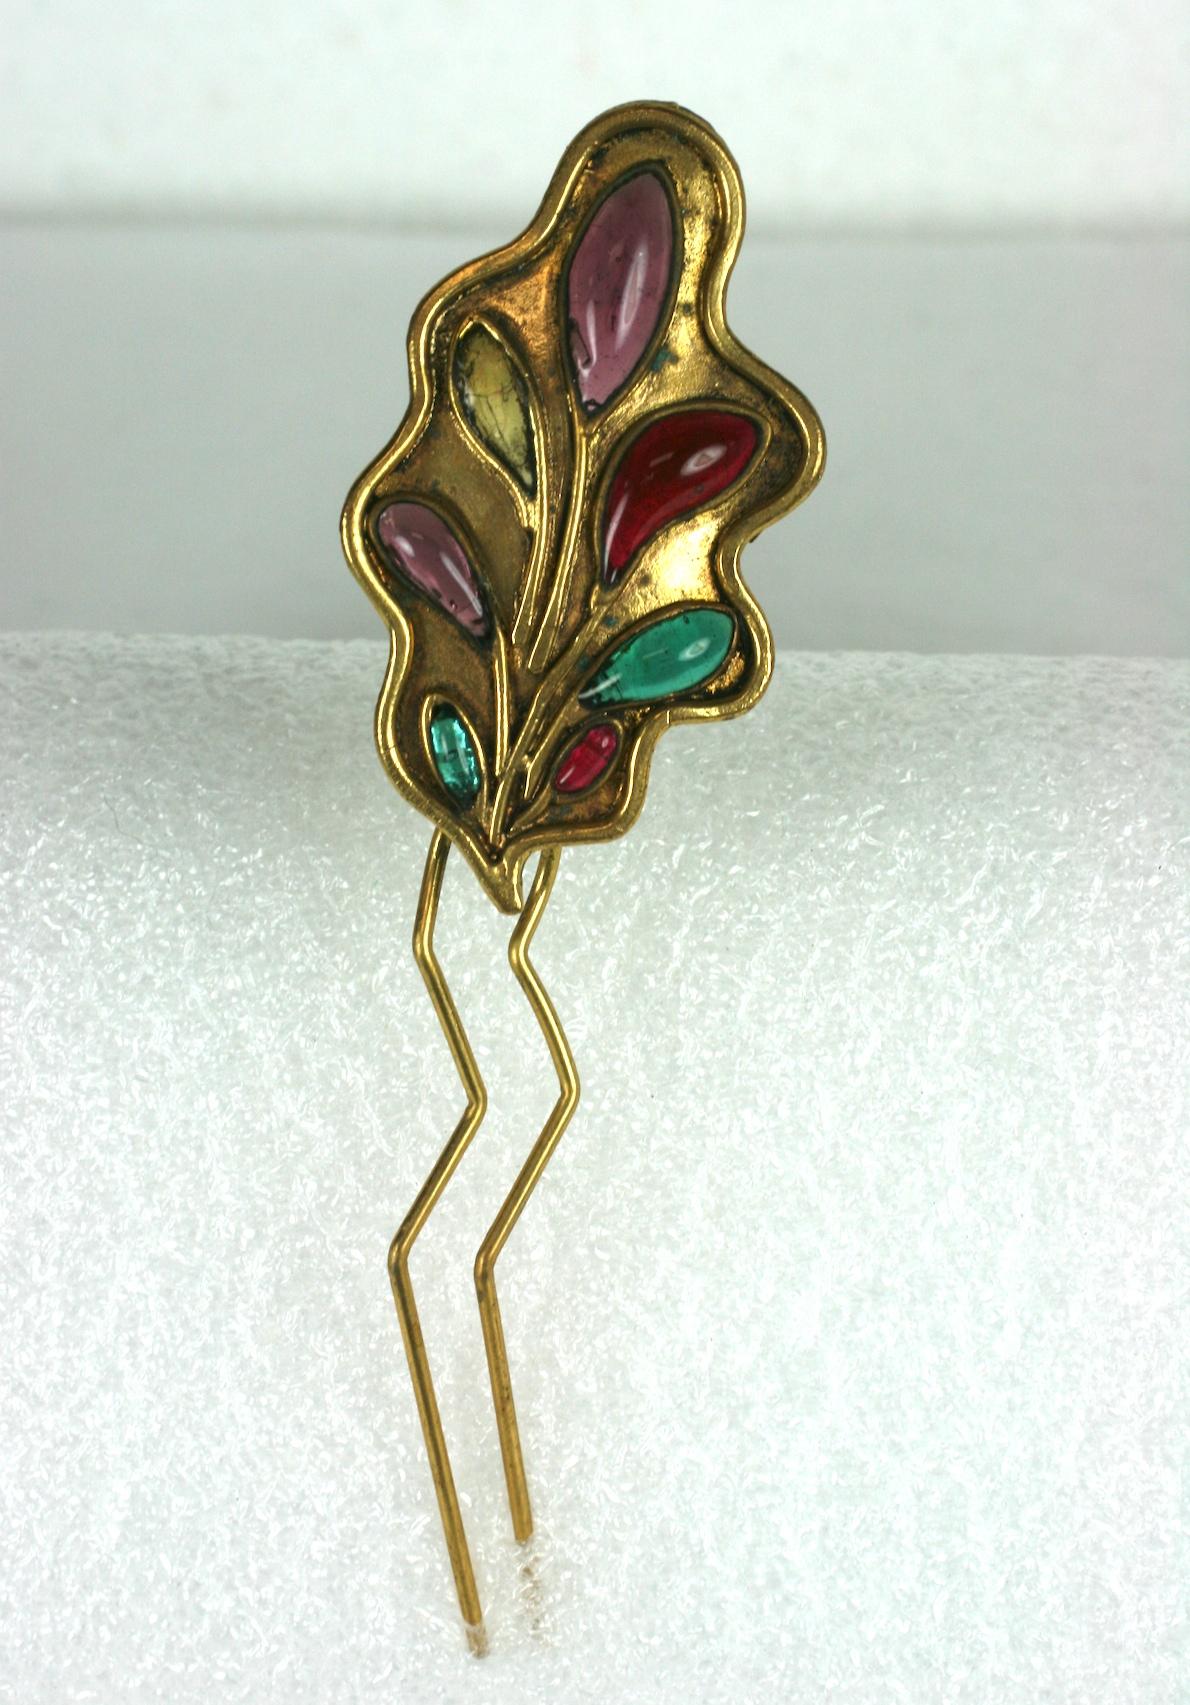 Lovely Maison Gripoix for Isabel Canovas gilt bronze hair comb. Formed as an abstract oak leaf with Gripoix poured glass enamel leaf and oval cabocheons in gem tone colors. 1980's France.
Excellent Condition. Signed.
Length 4 3/4